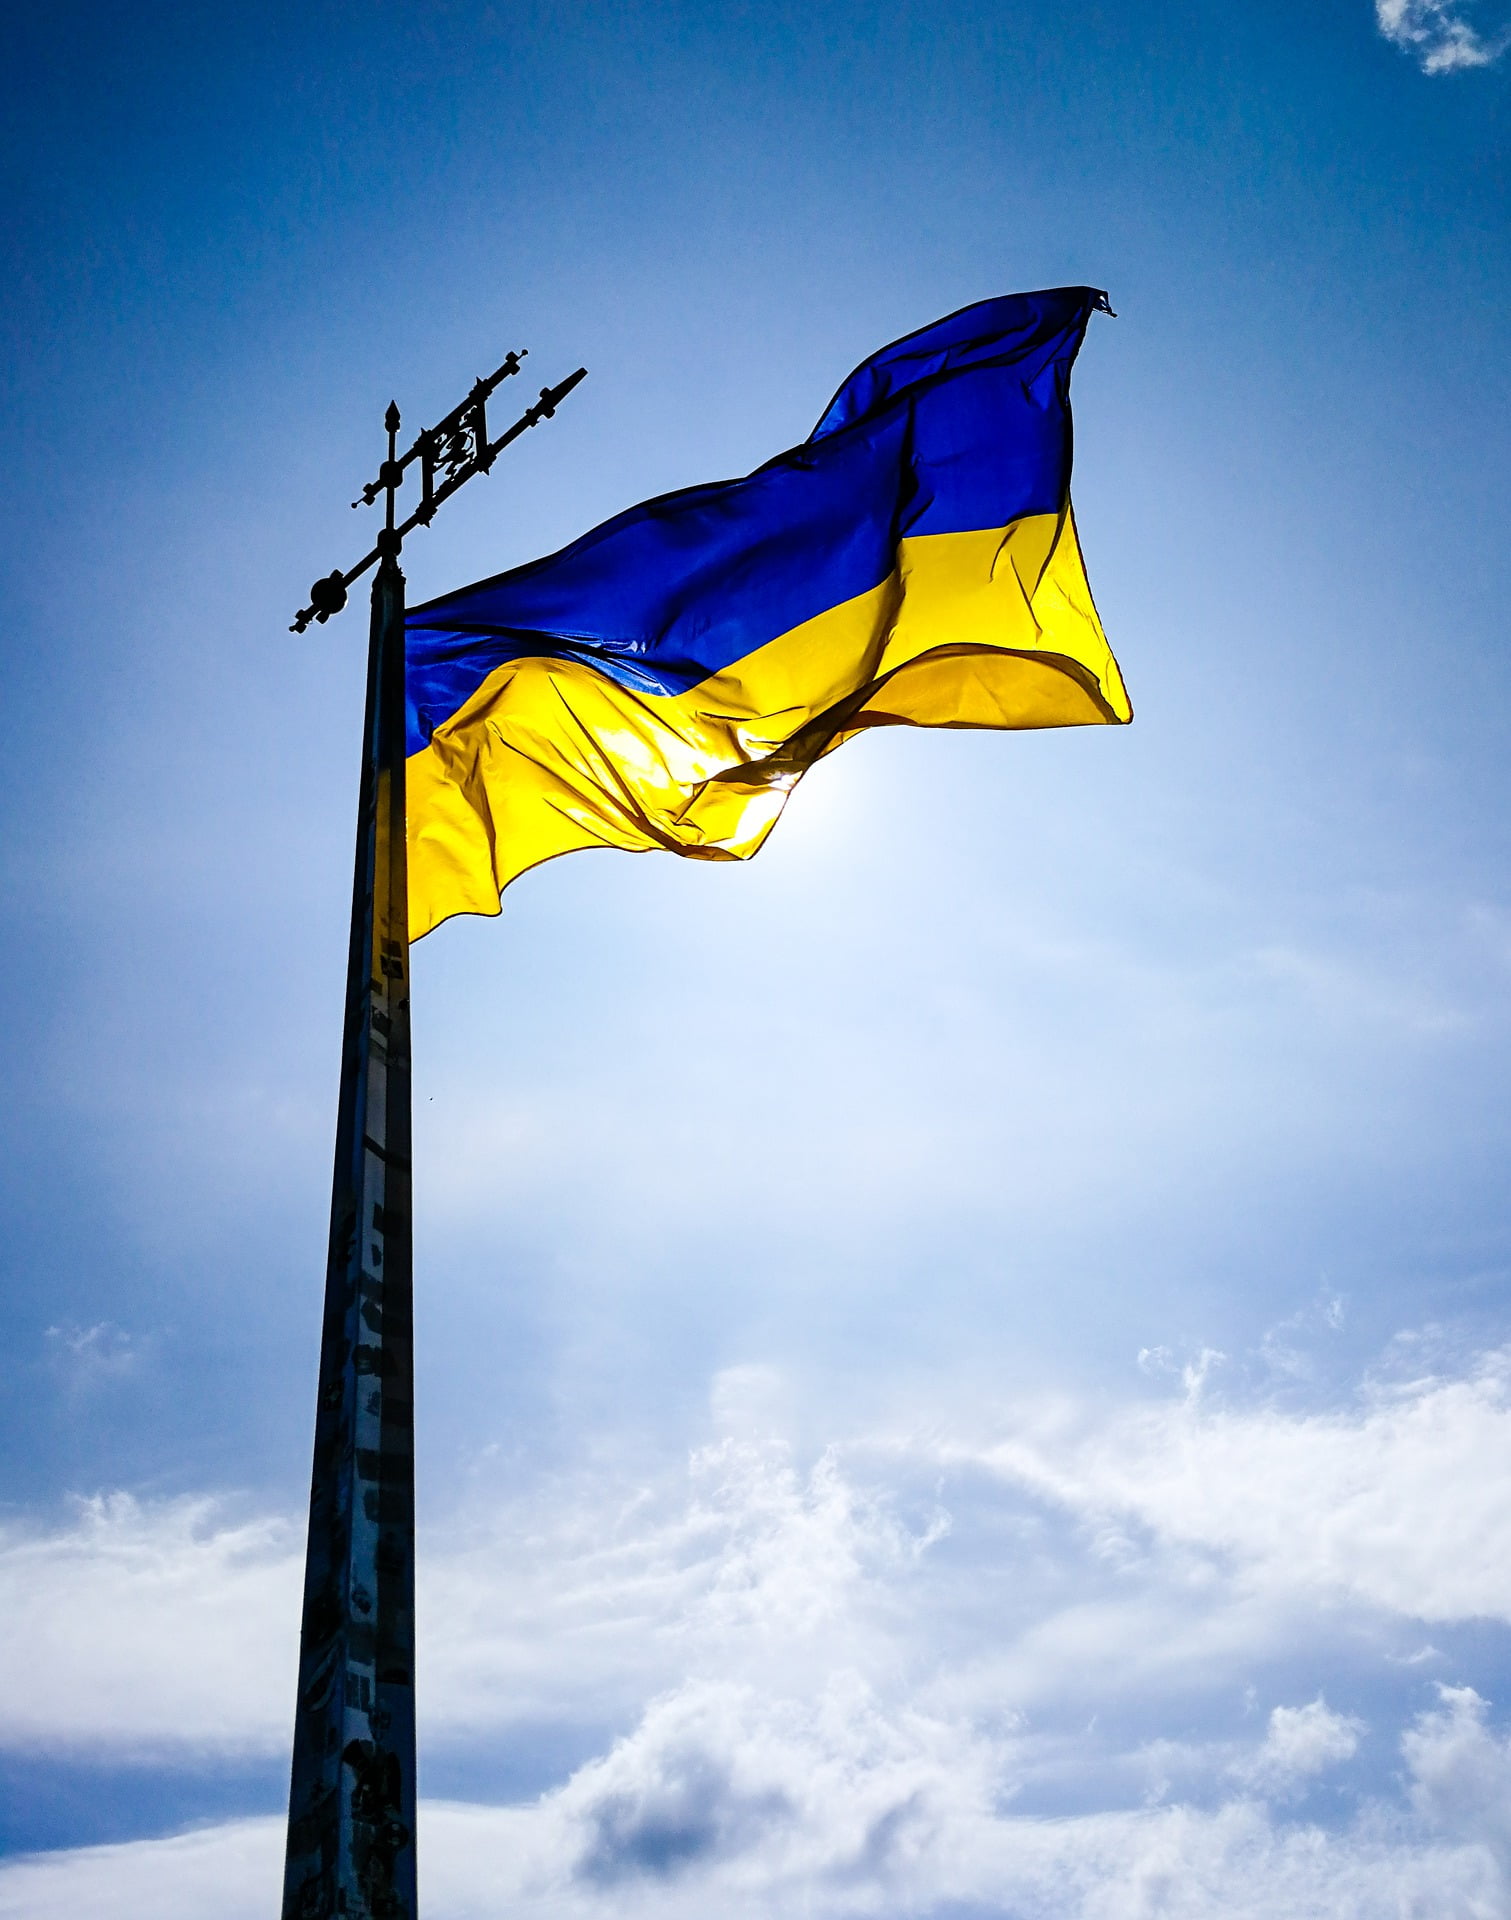 Business continuity in Ukraine: Announcement to our clients and partners